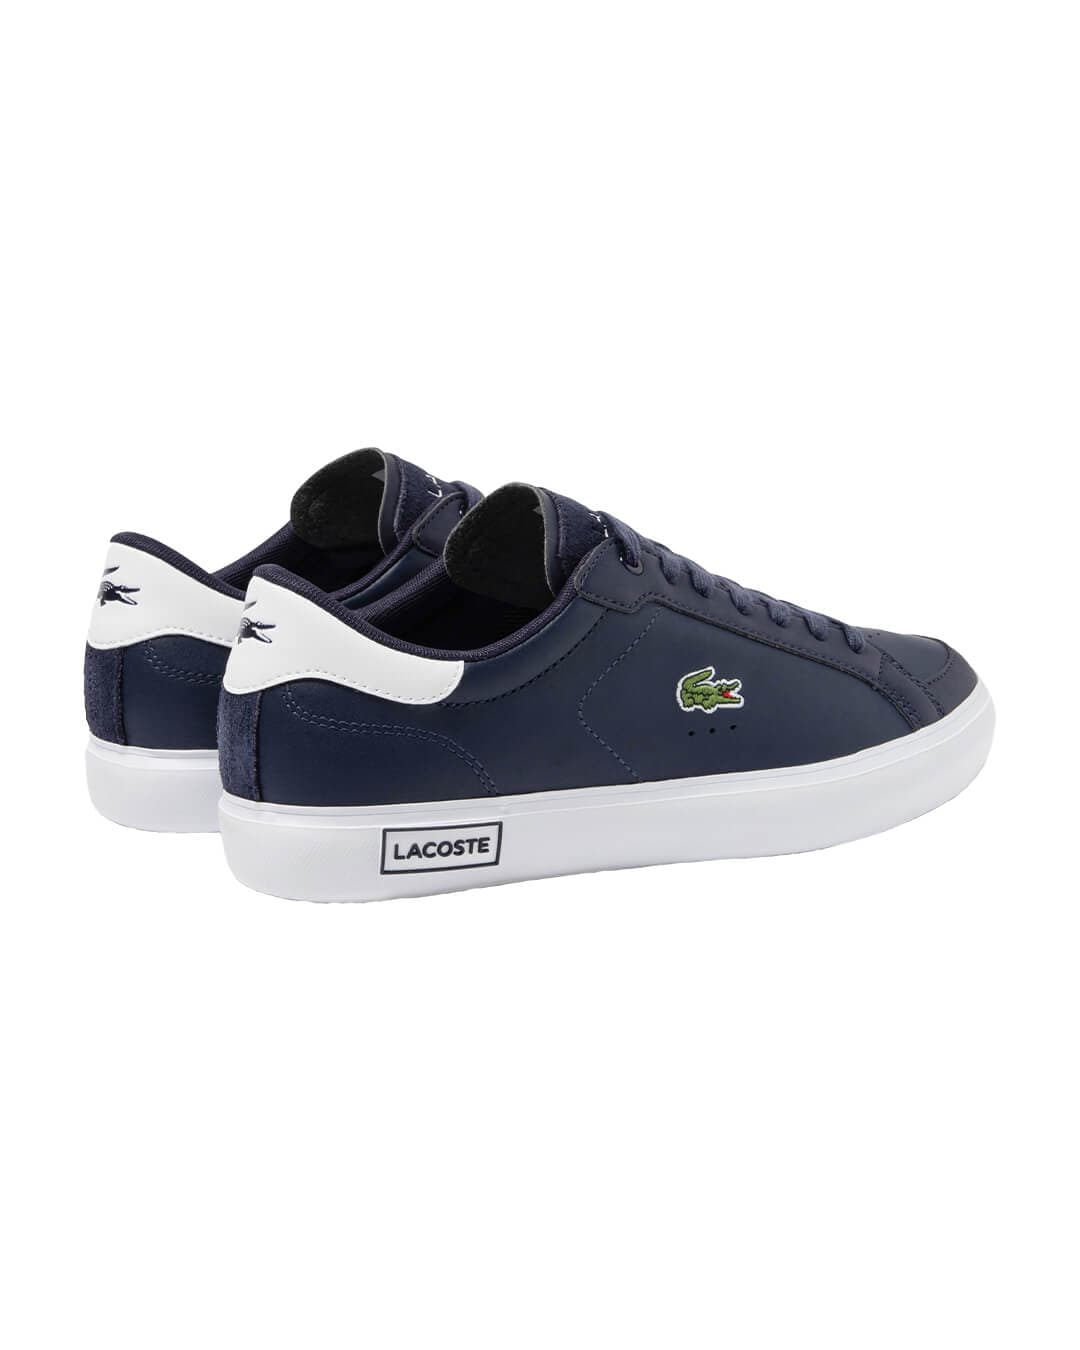 Lacoste Shoes Lacoste Powercourt Leather Navy Block Sneakers